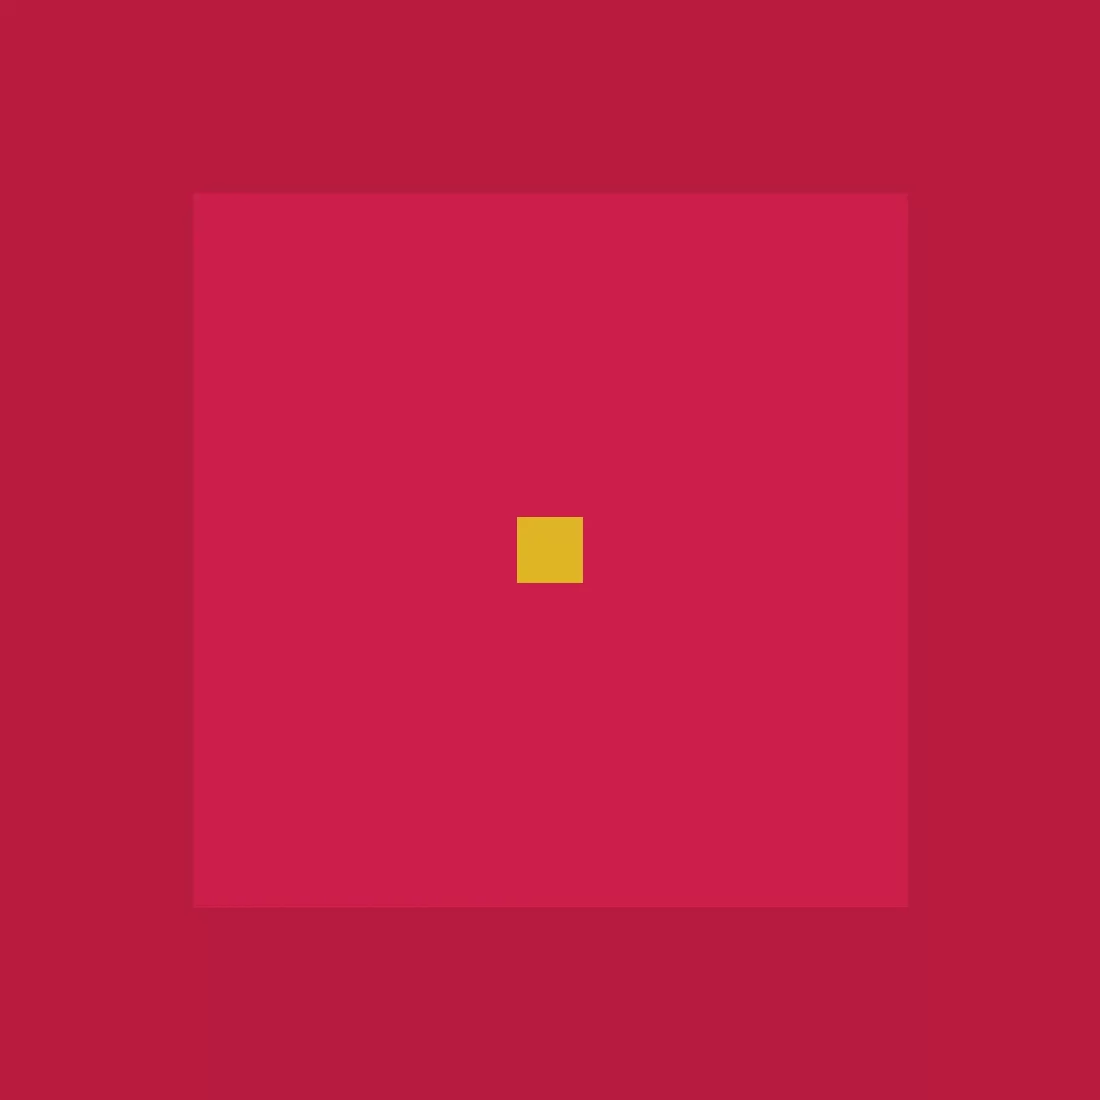 A red square with a yellow point in the middle. 2001 and Johannes Itten inspiration